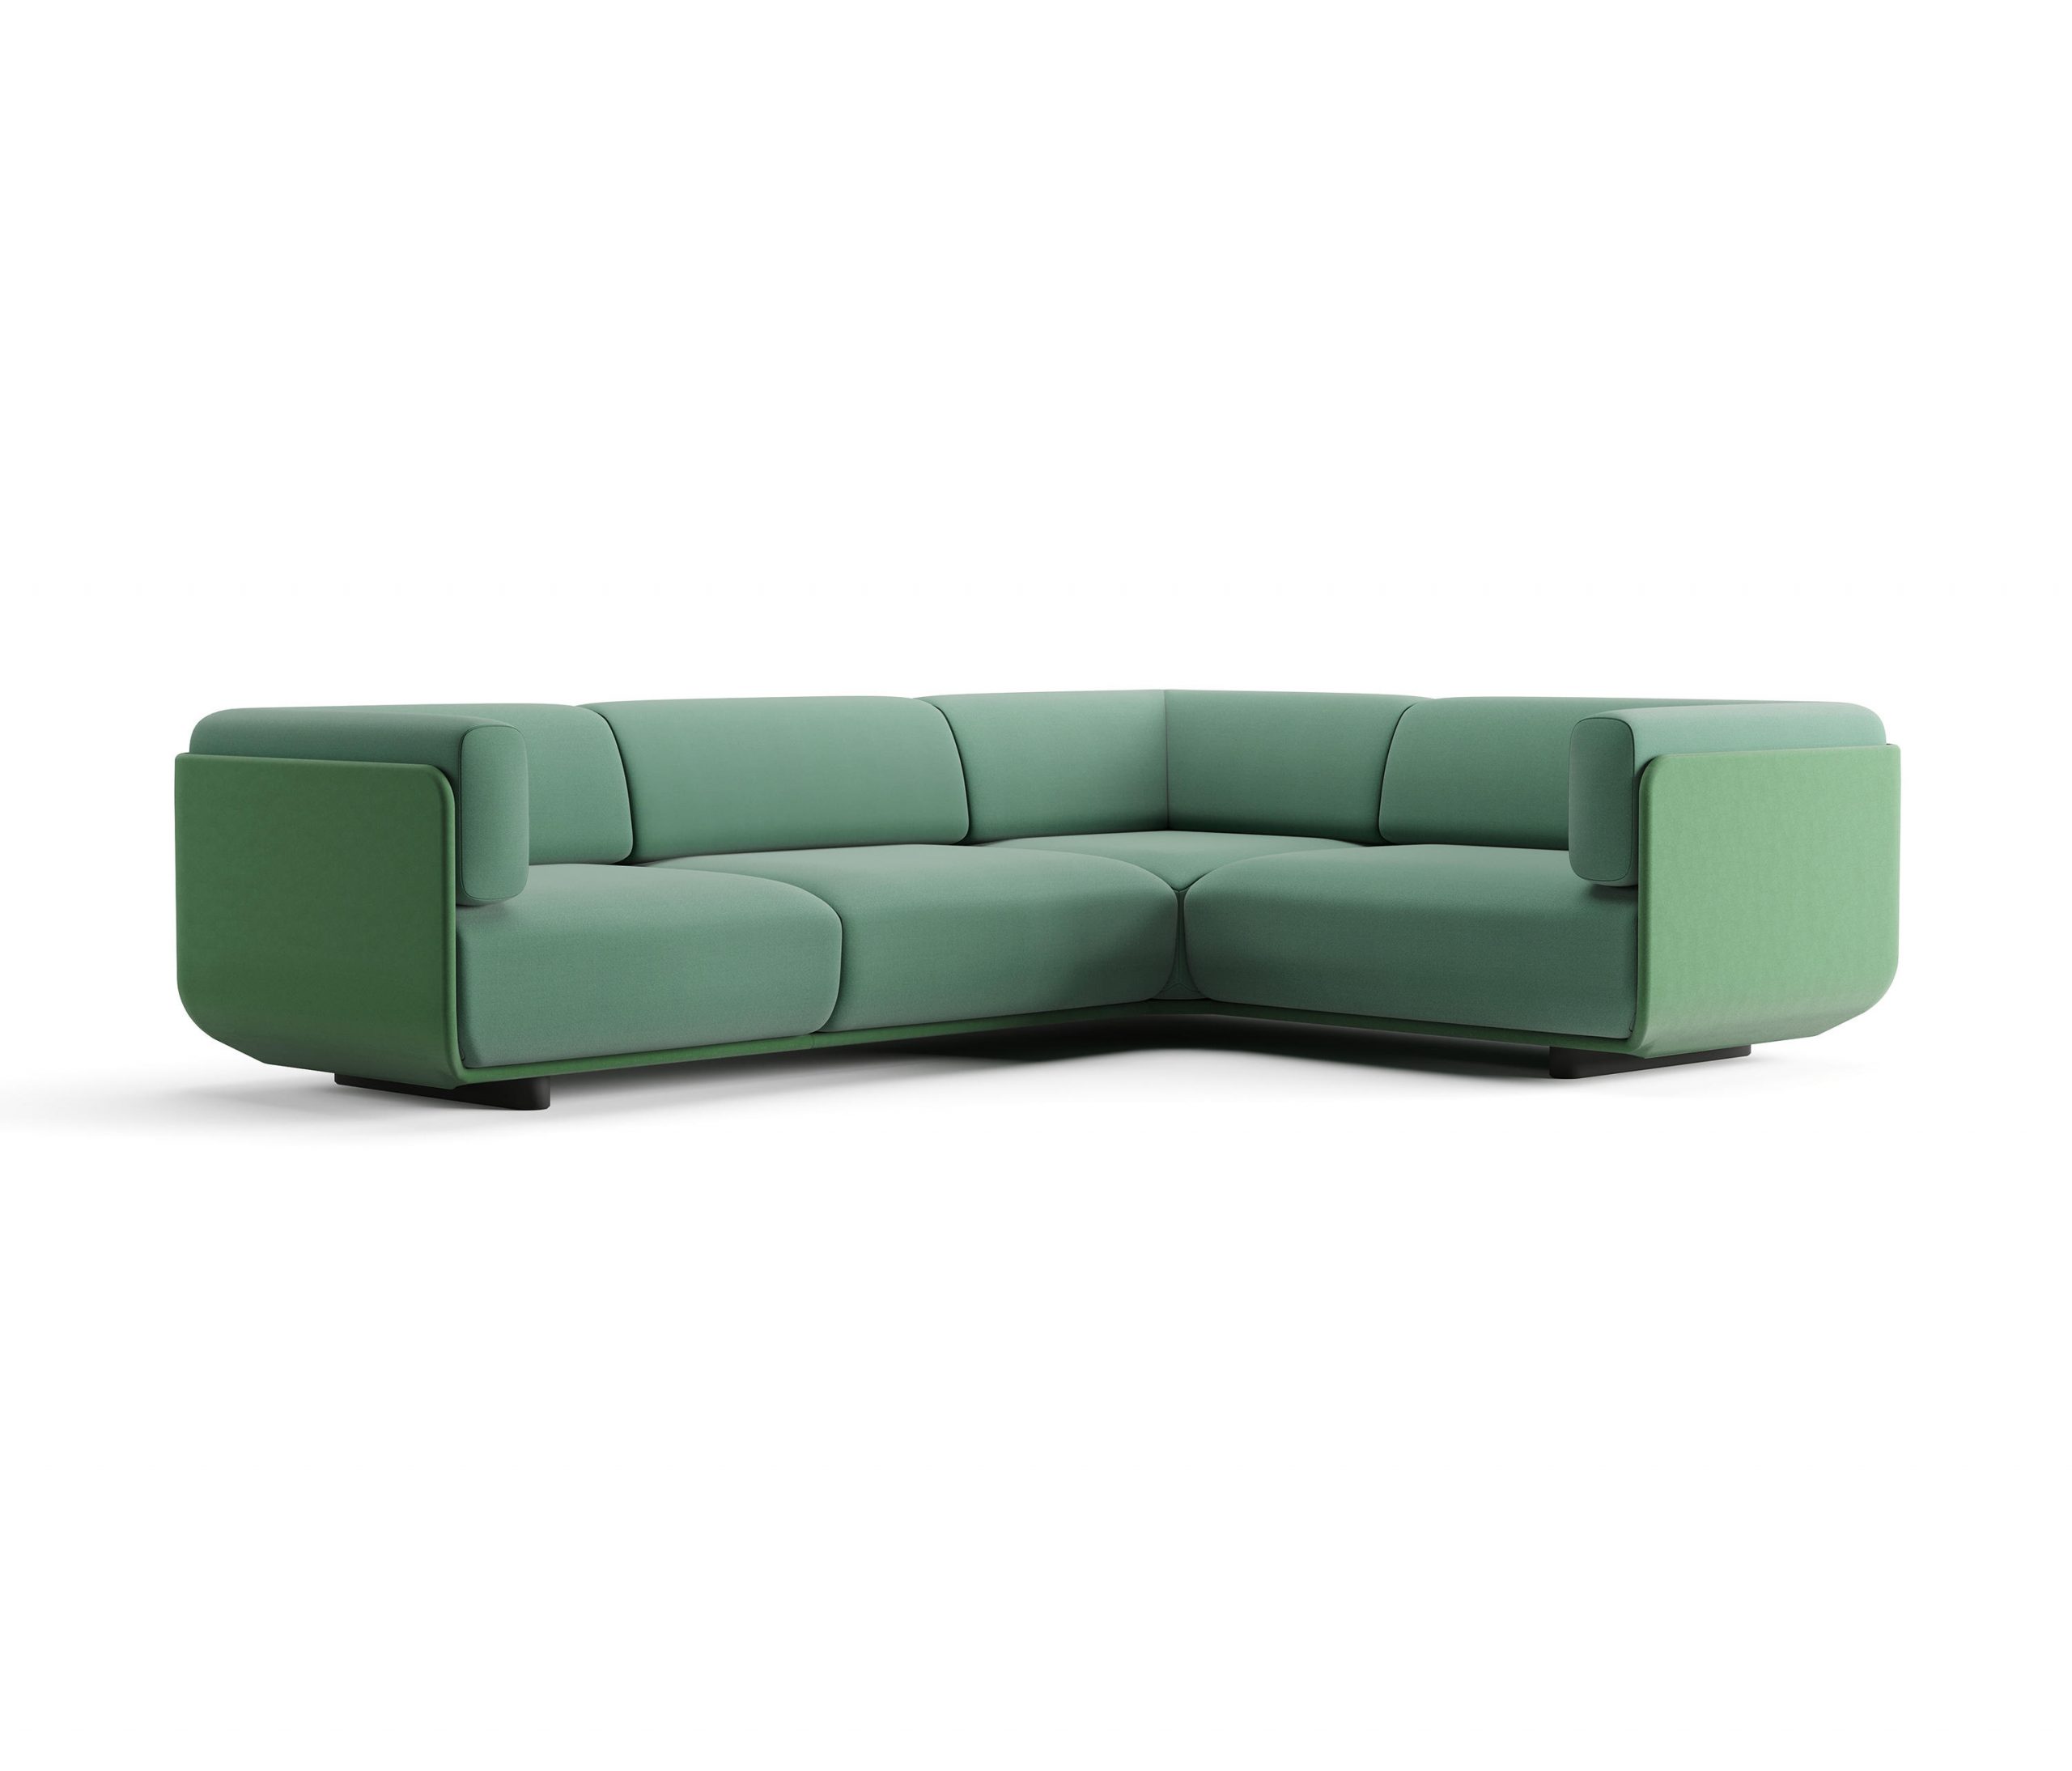 Shaal Sofa by Doshi Levien for Arper